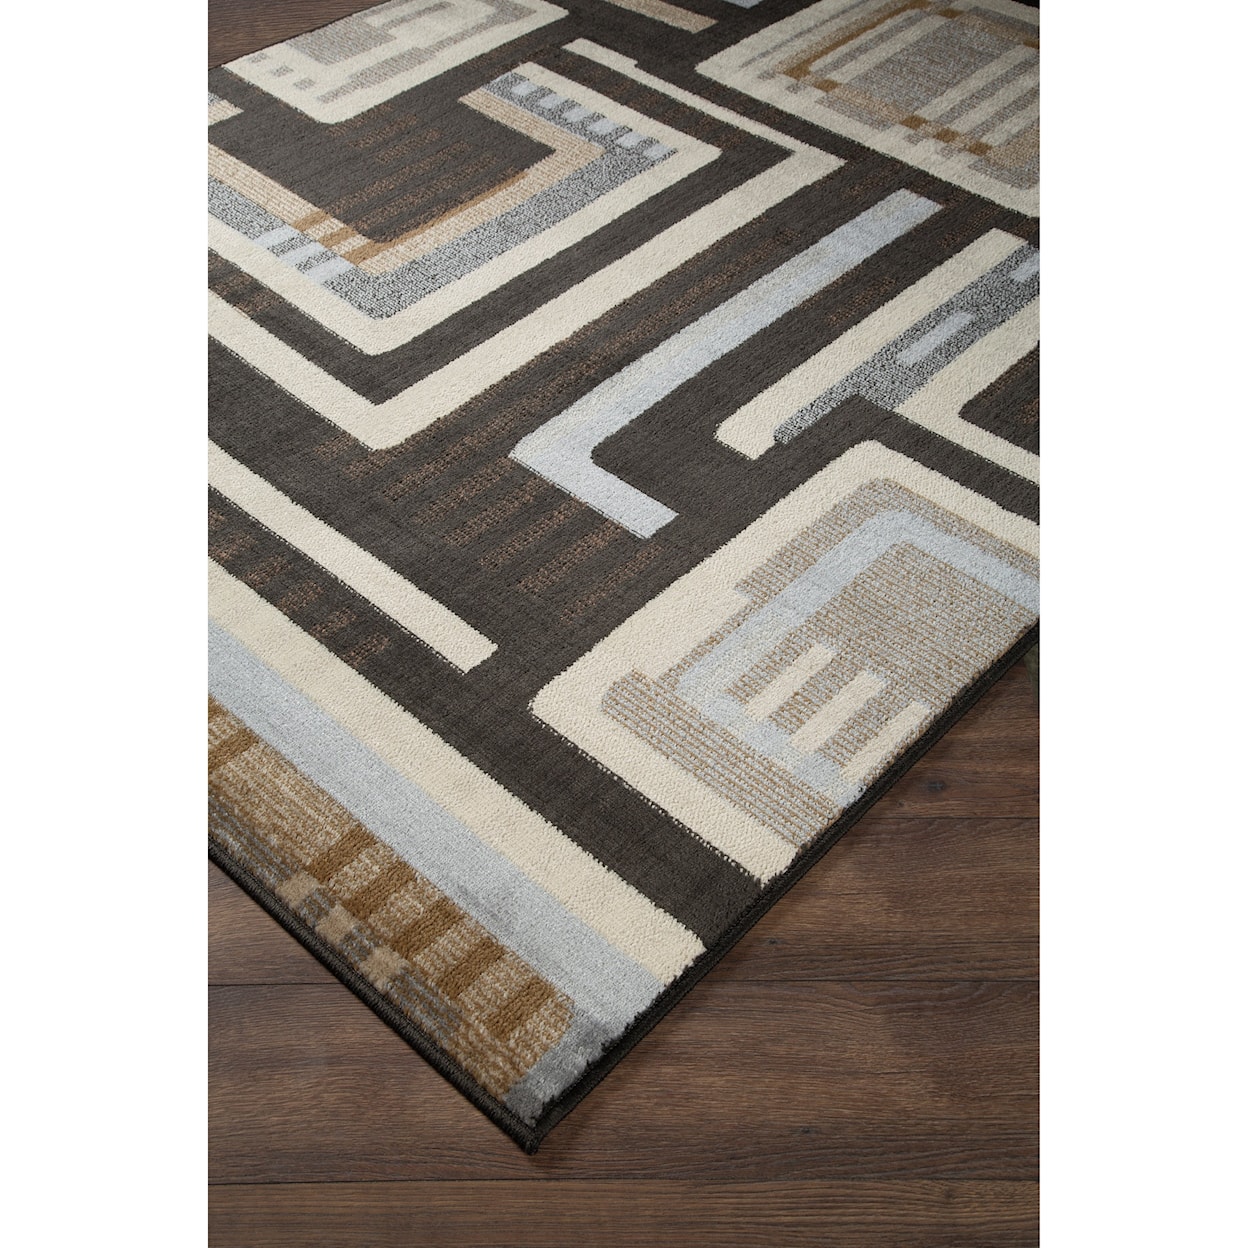 Signature Design by Ashley Contemporary Area Rugs 5x7 Rug